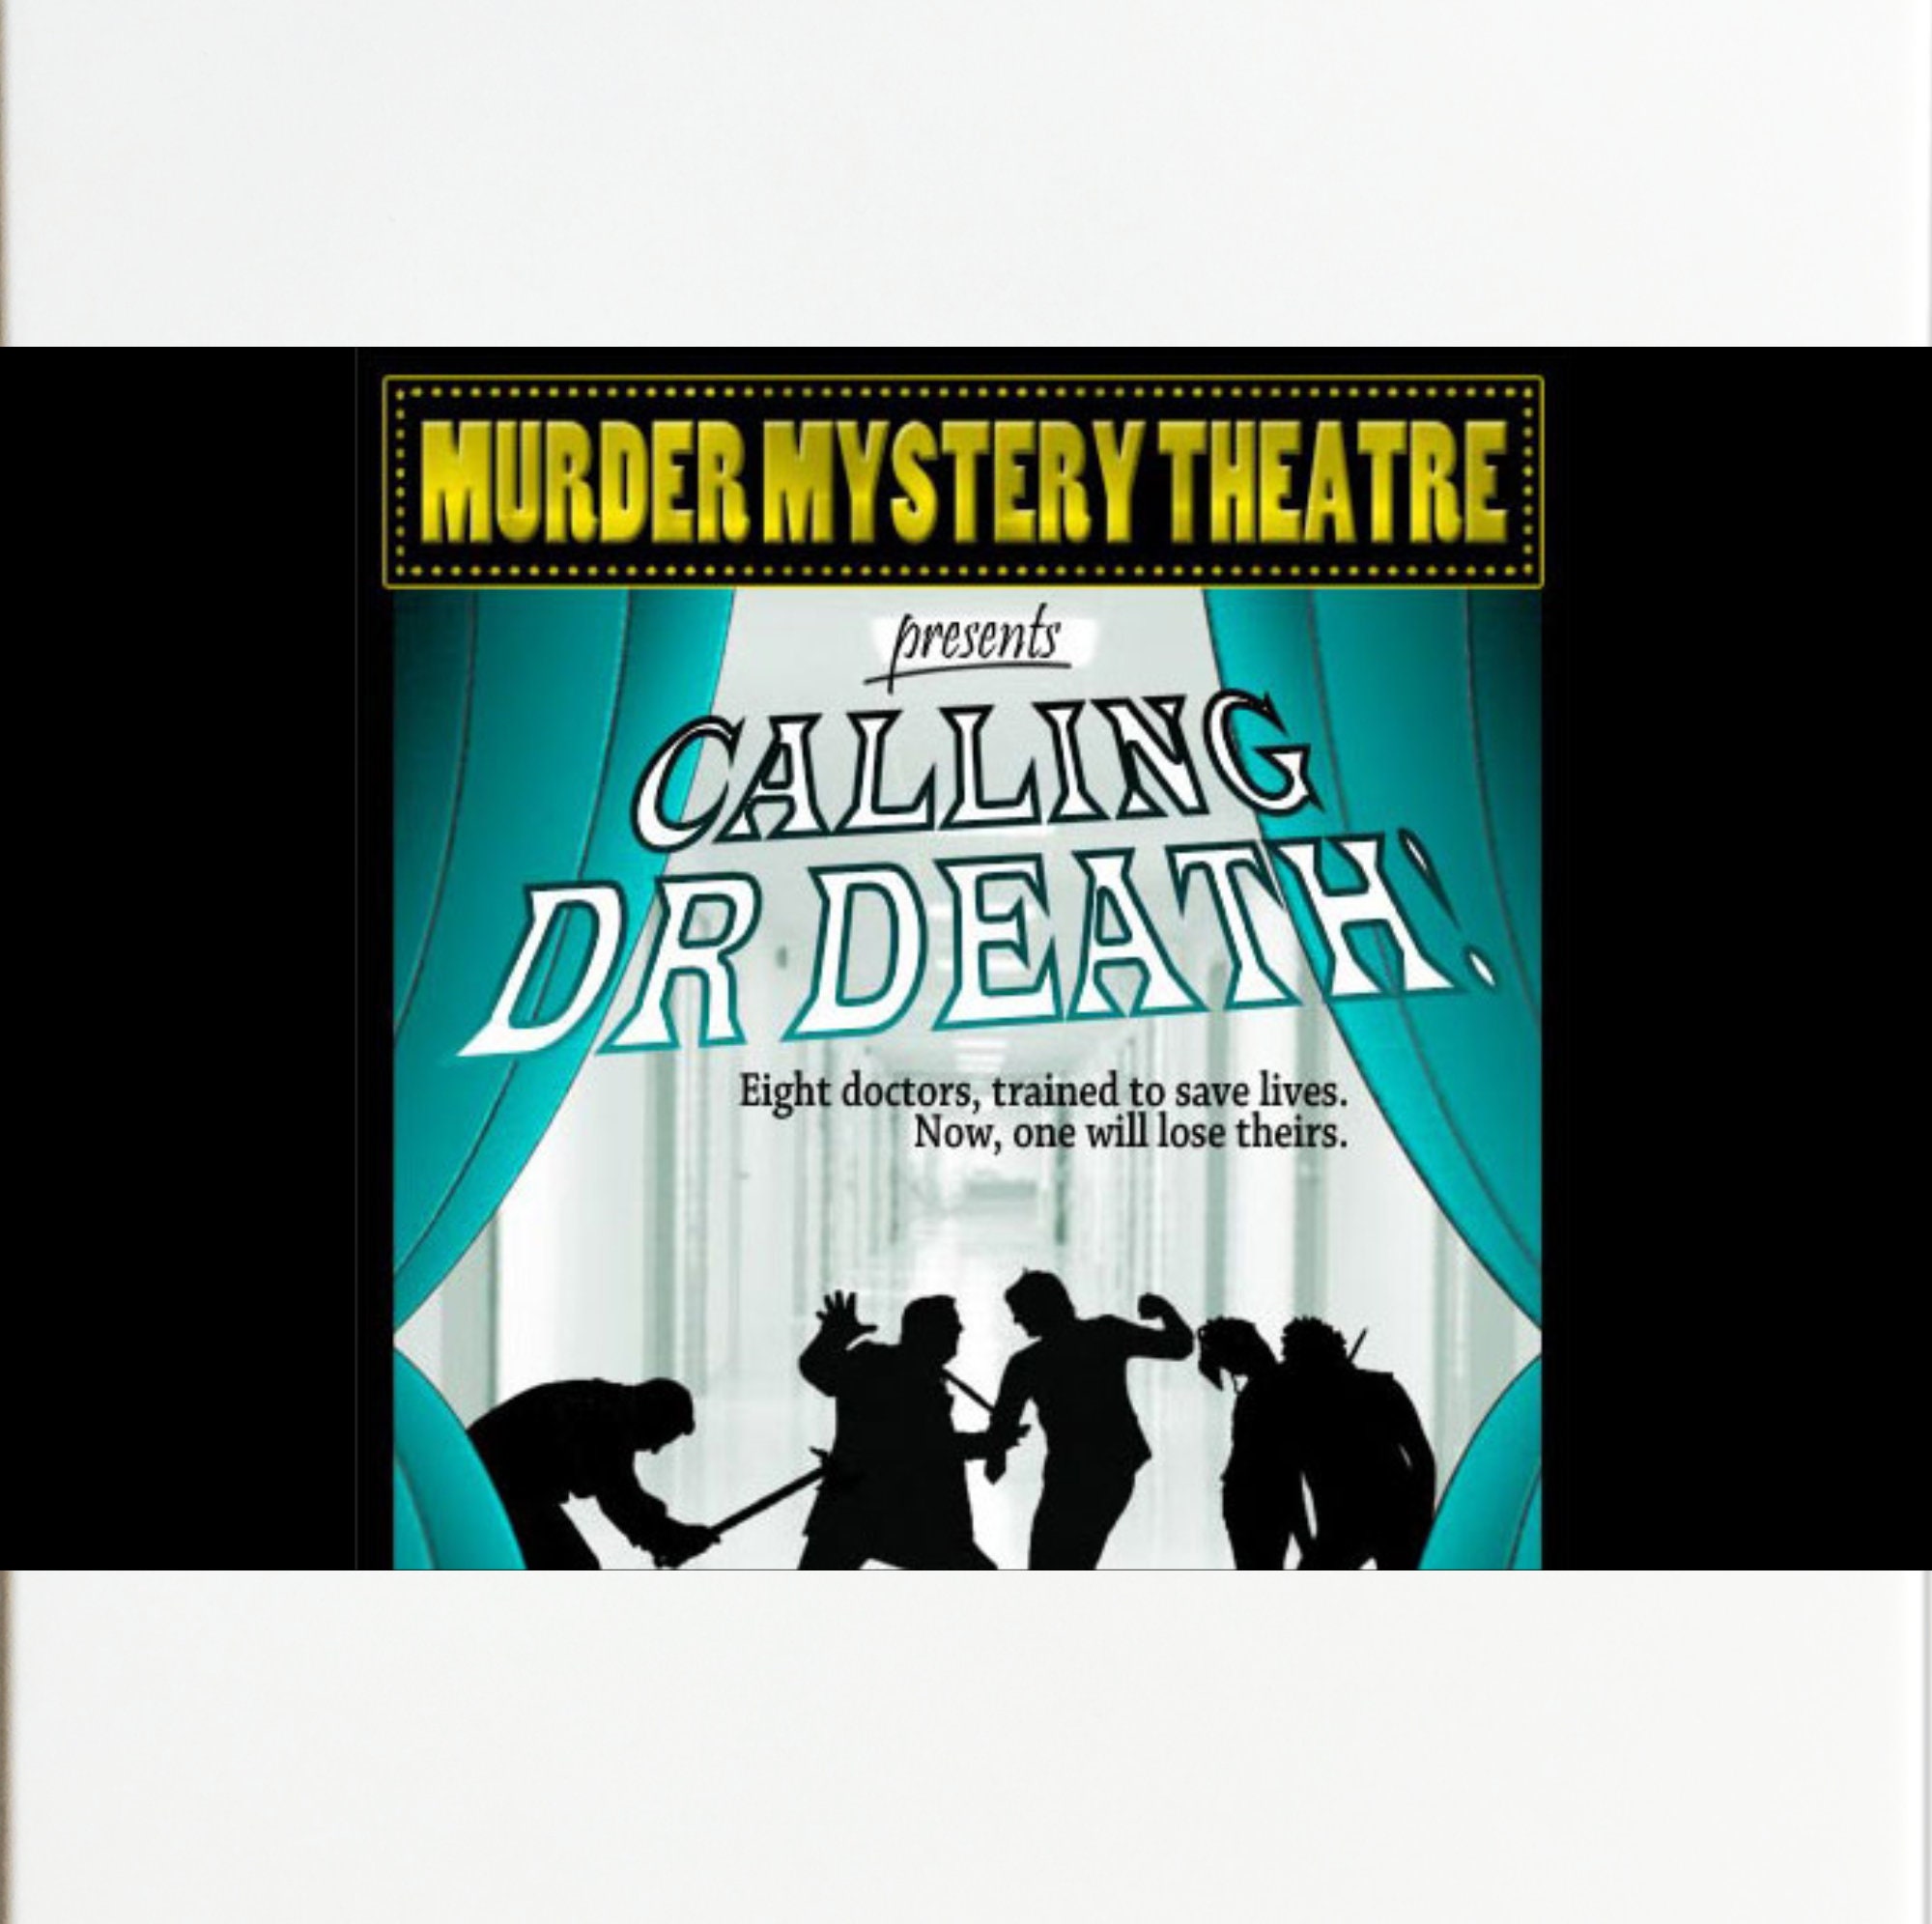 Living Room Theatre Hospital Drama Themed Murder Mystery for 8